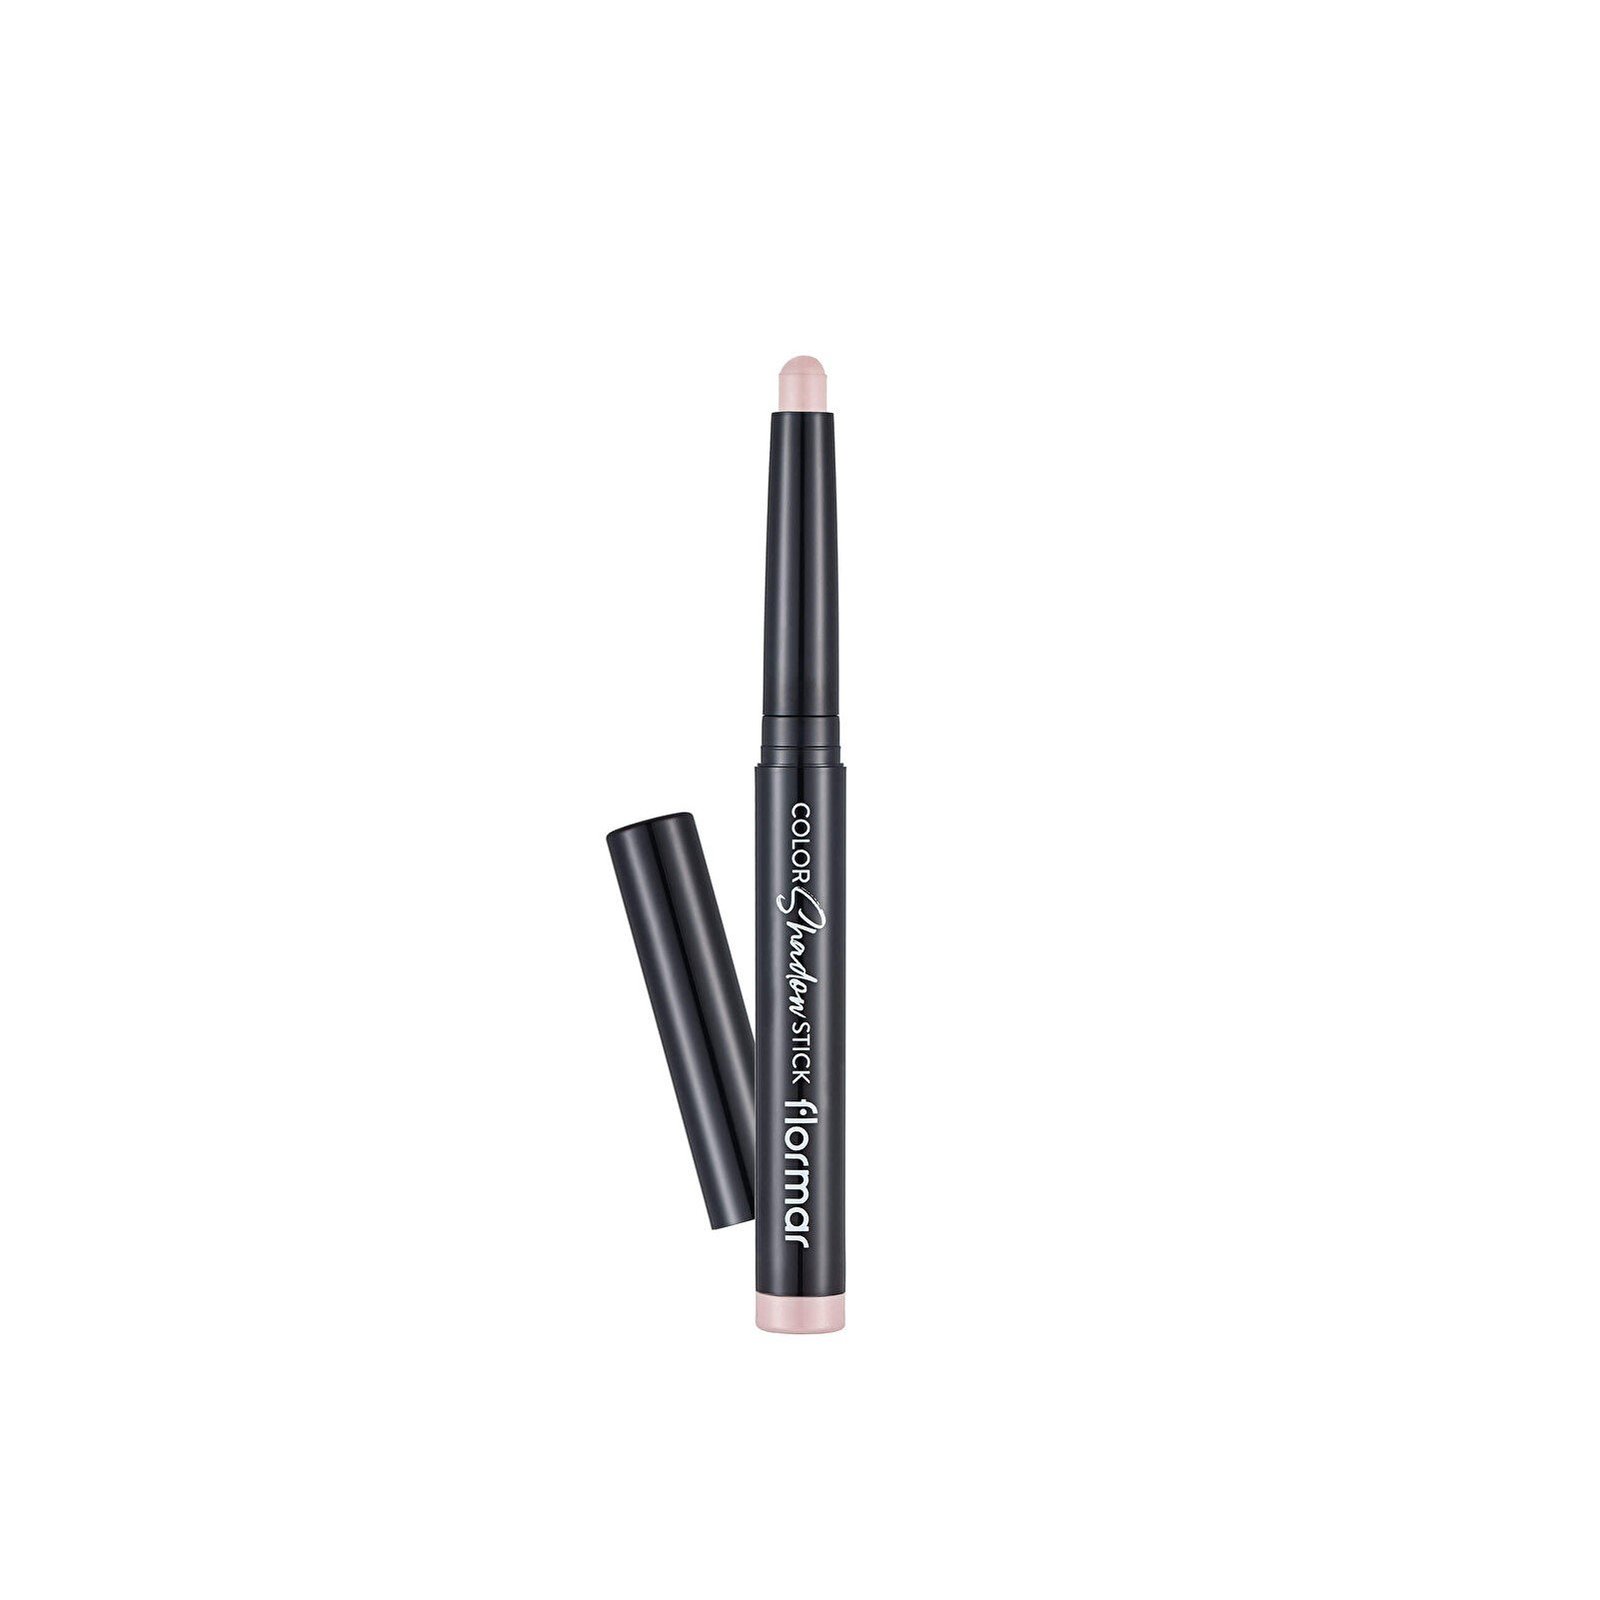 Flormar Color Shadow Stick 005 Icy Pink 1.6g (0.056 oz)